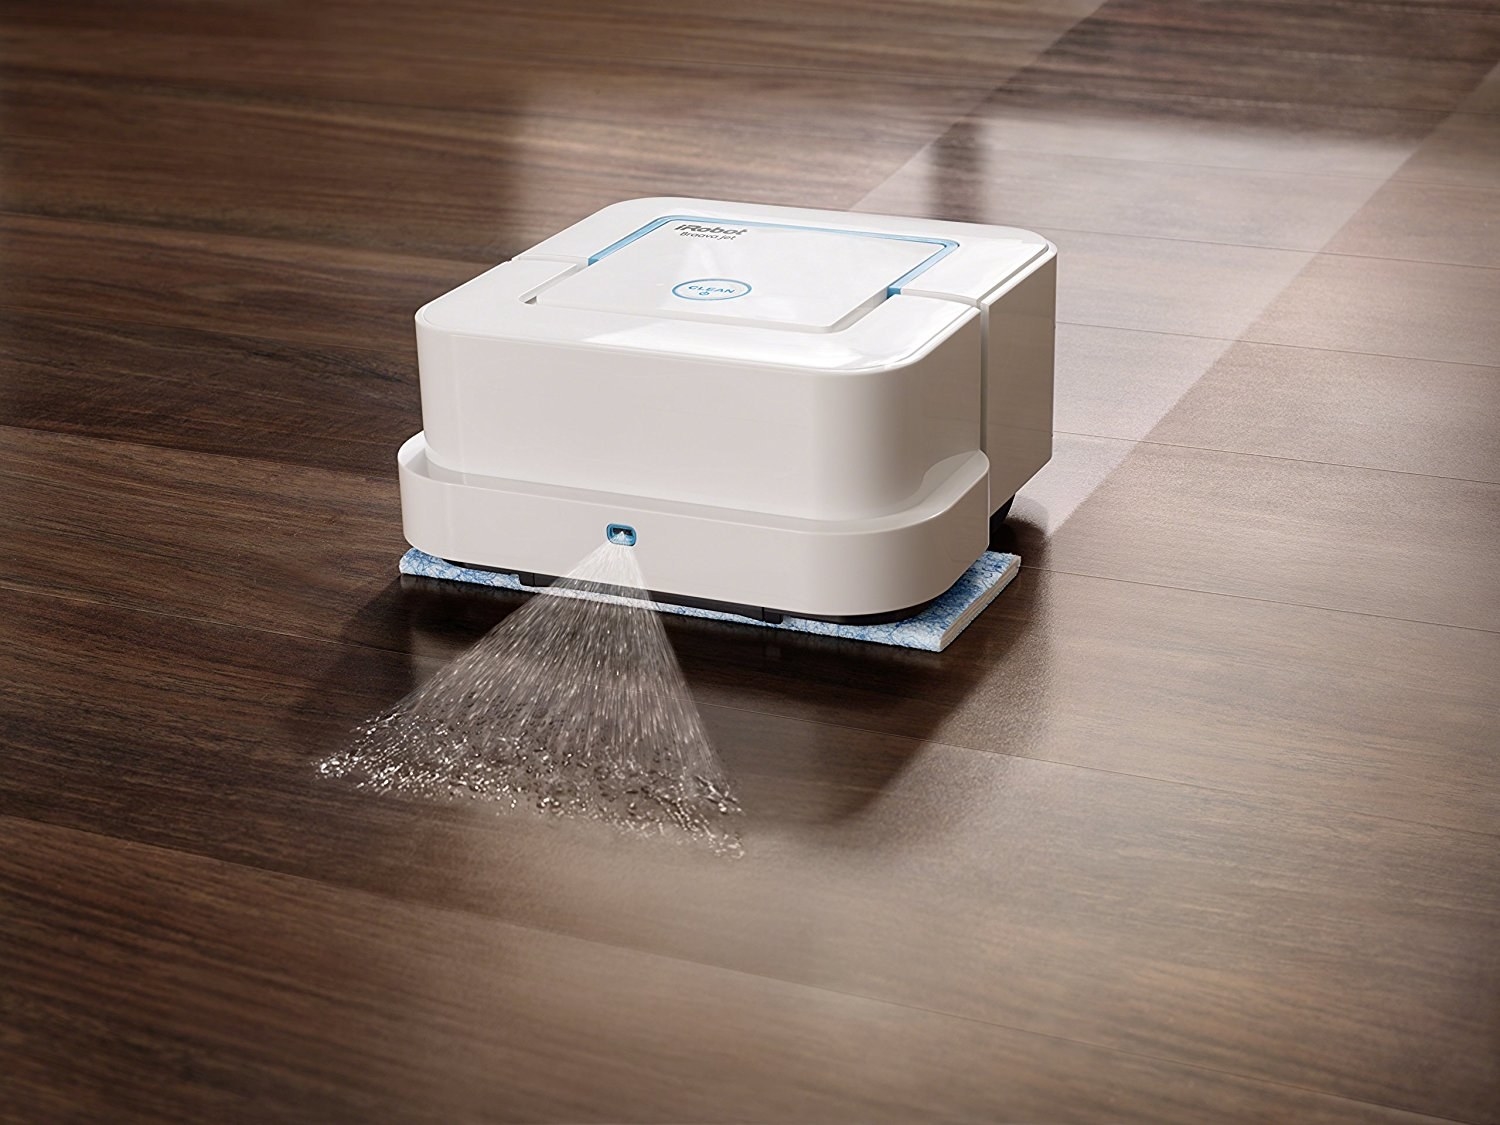 small square device sprays liquid and mops 